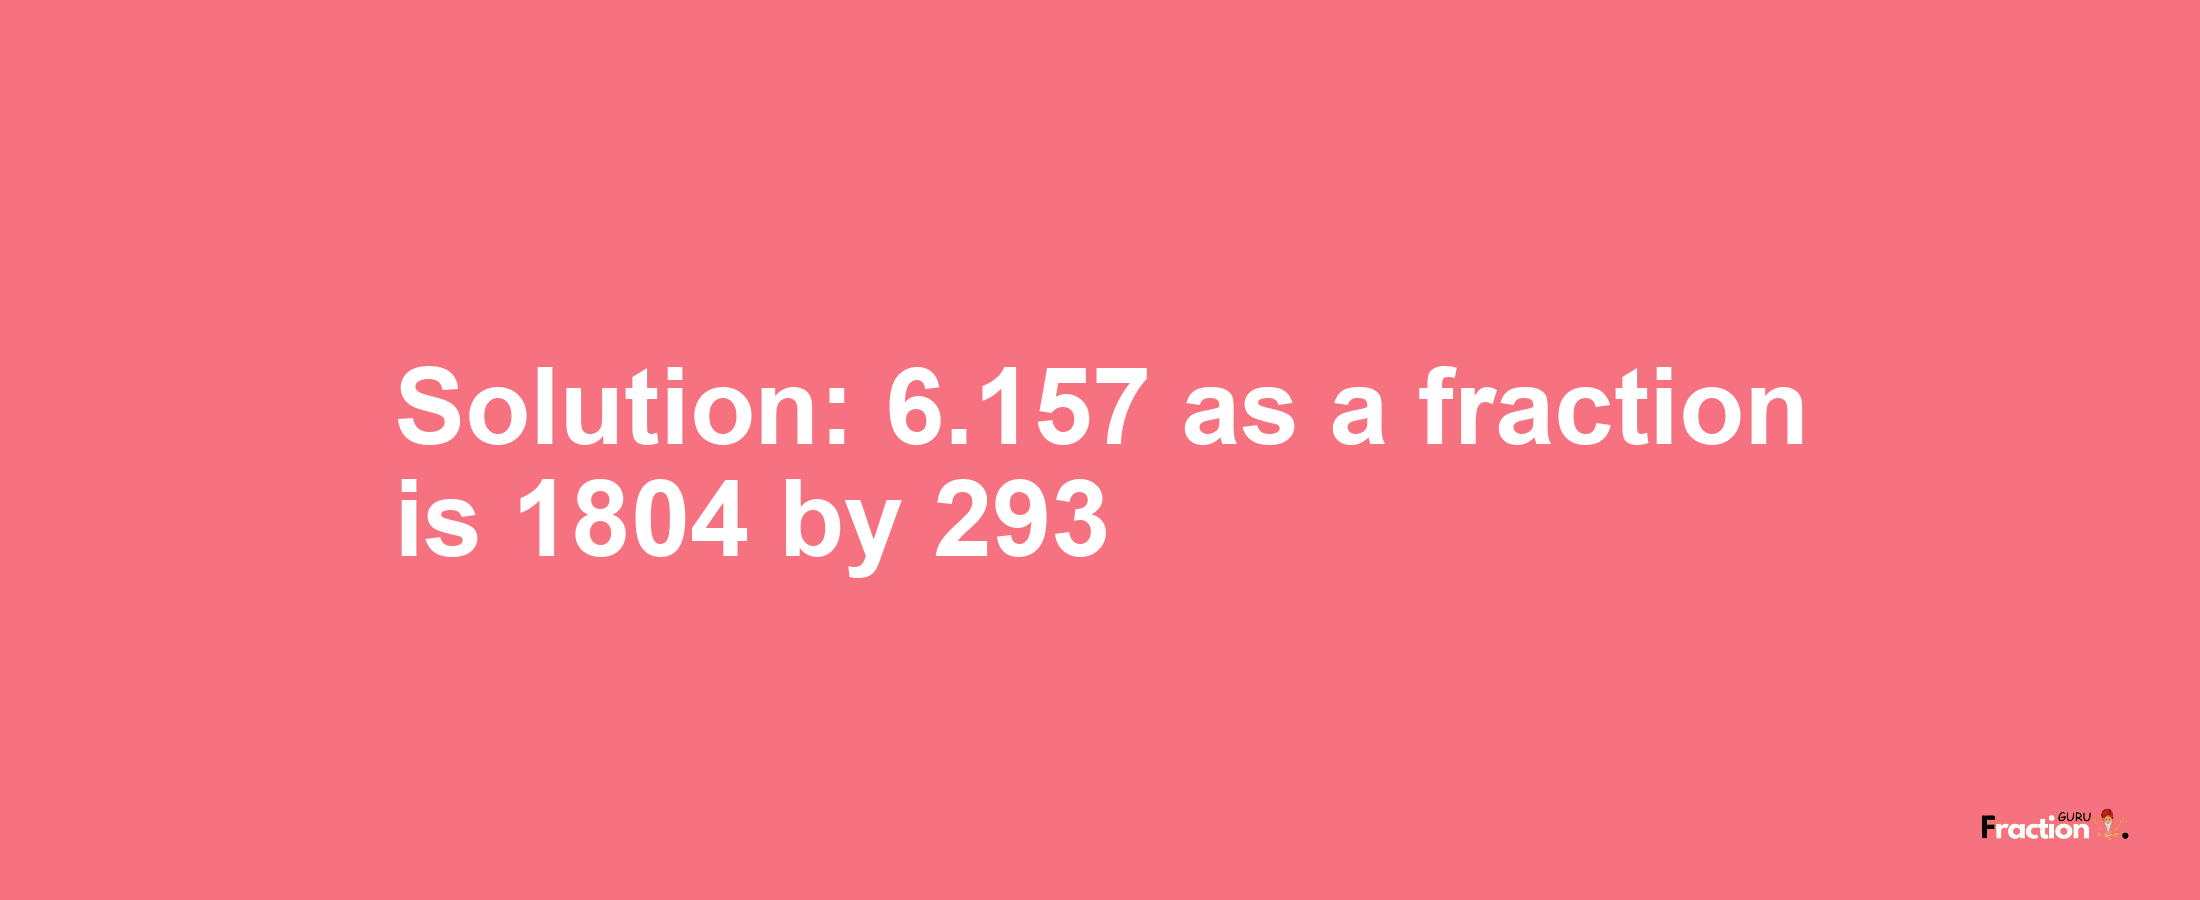 Solution:6.157 as a fraction is 1804/293